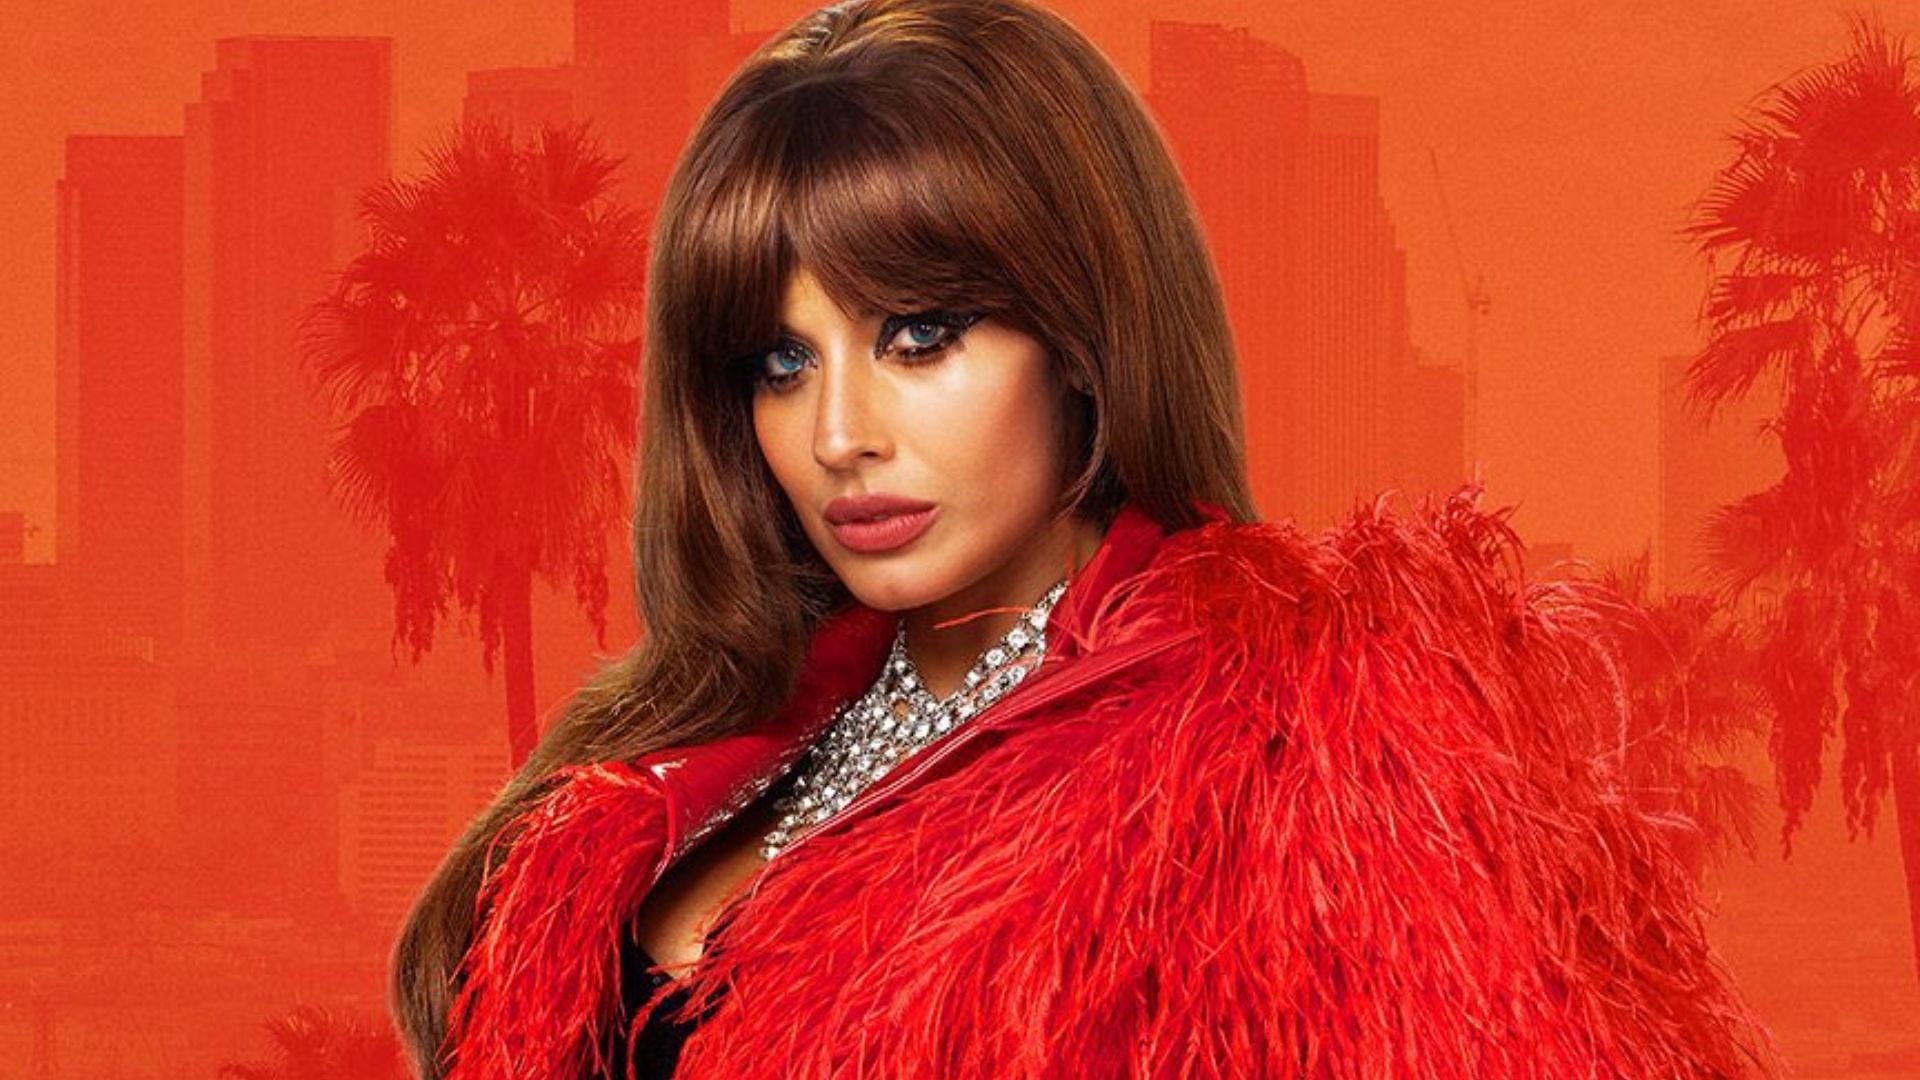 She-Hulk - 5 things you didn't know about Jameela Jamil